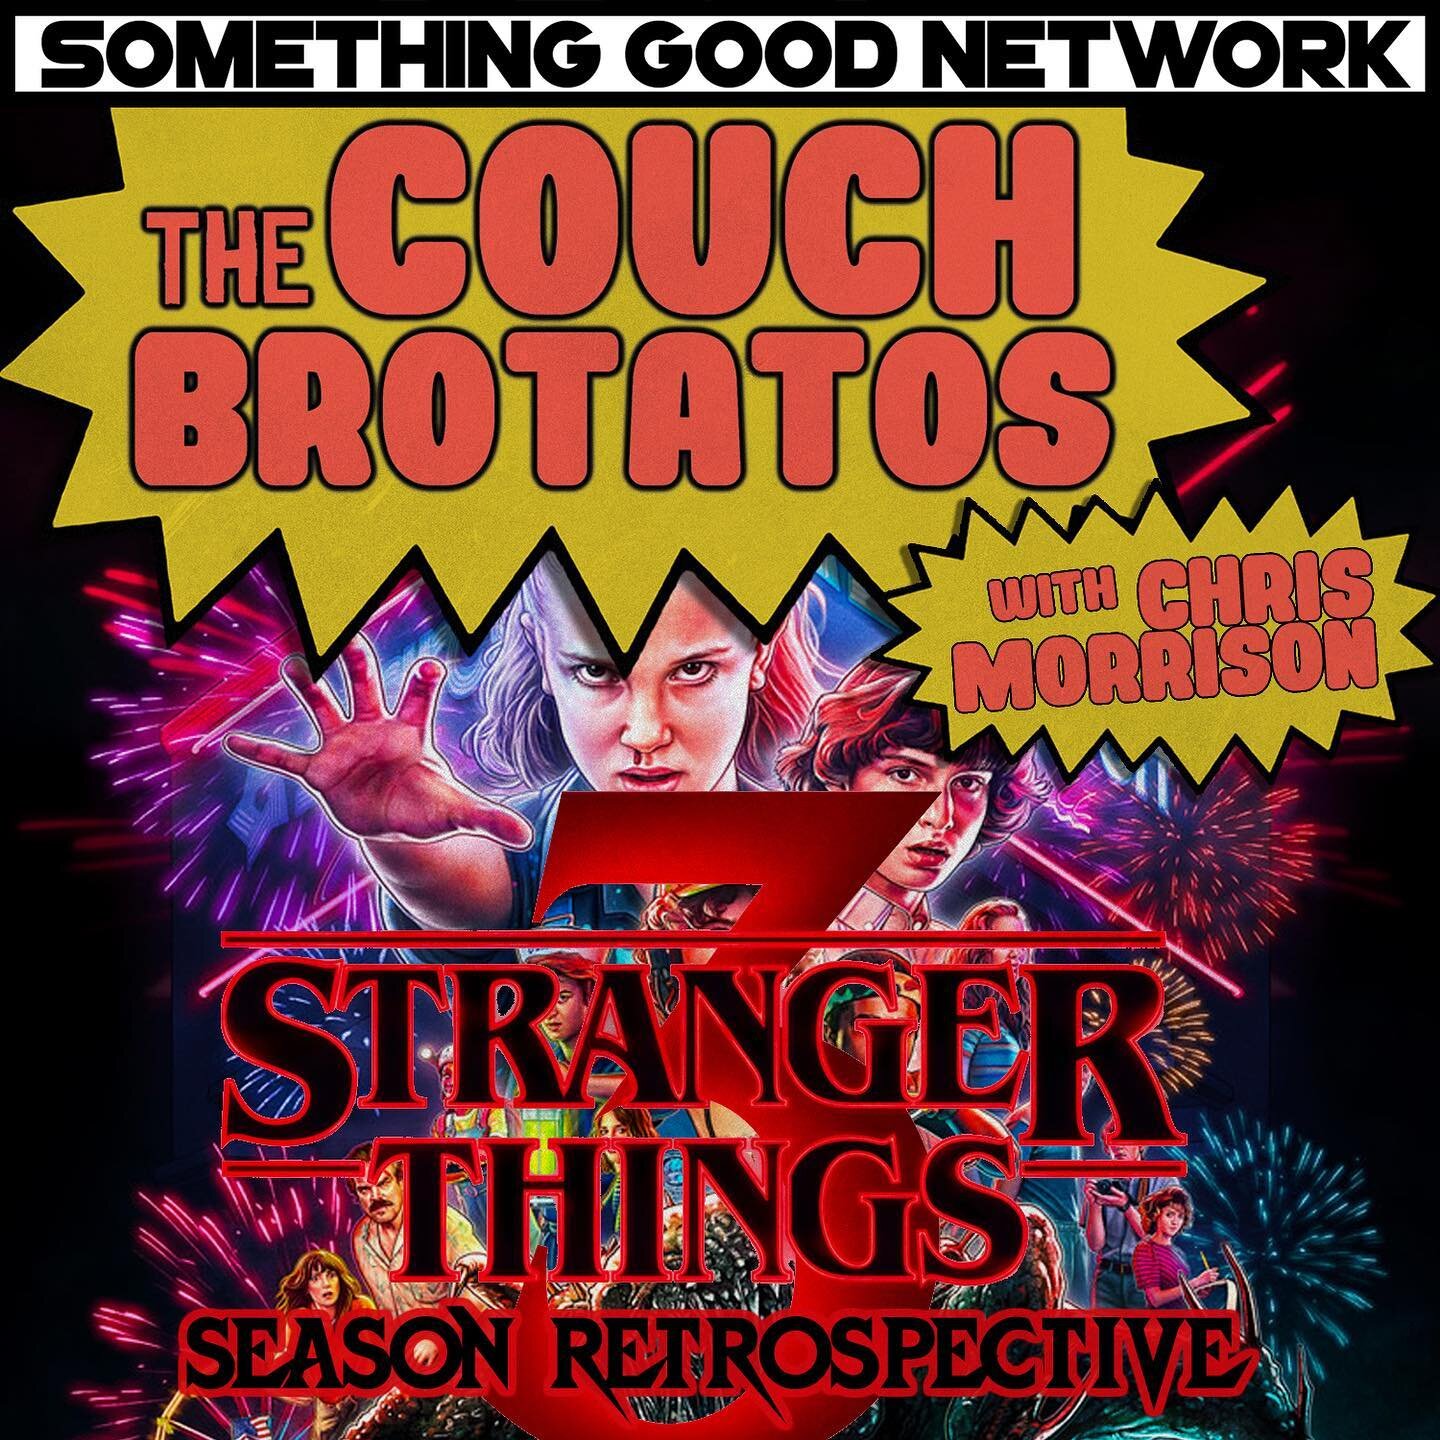 Our STRANGER THINGS retrospective rapped up yesterday on THE COUCH BROTATOS with our SEASON 3 breakdown! Take a listen on any podcast platform 🔥LINK IN BIO🔥
👹👹👹
This week, Alex and Chris wrap up their Stranger Things retrospective gearing up for